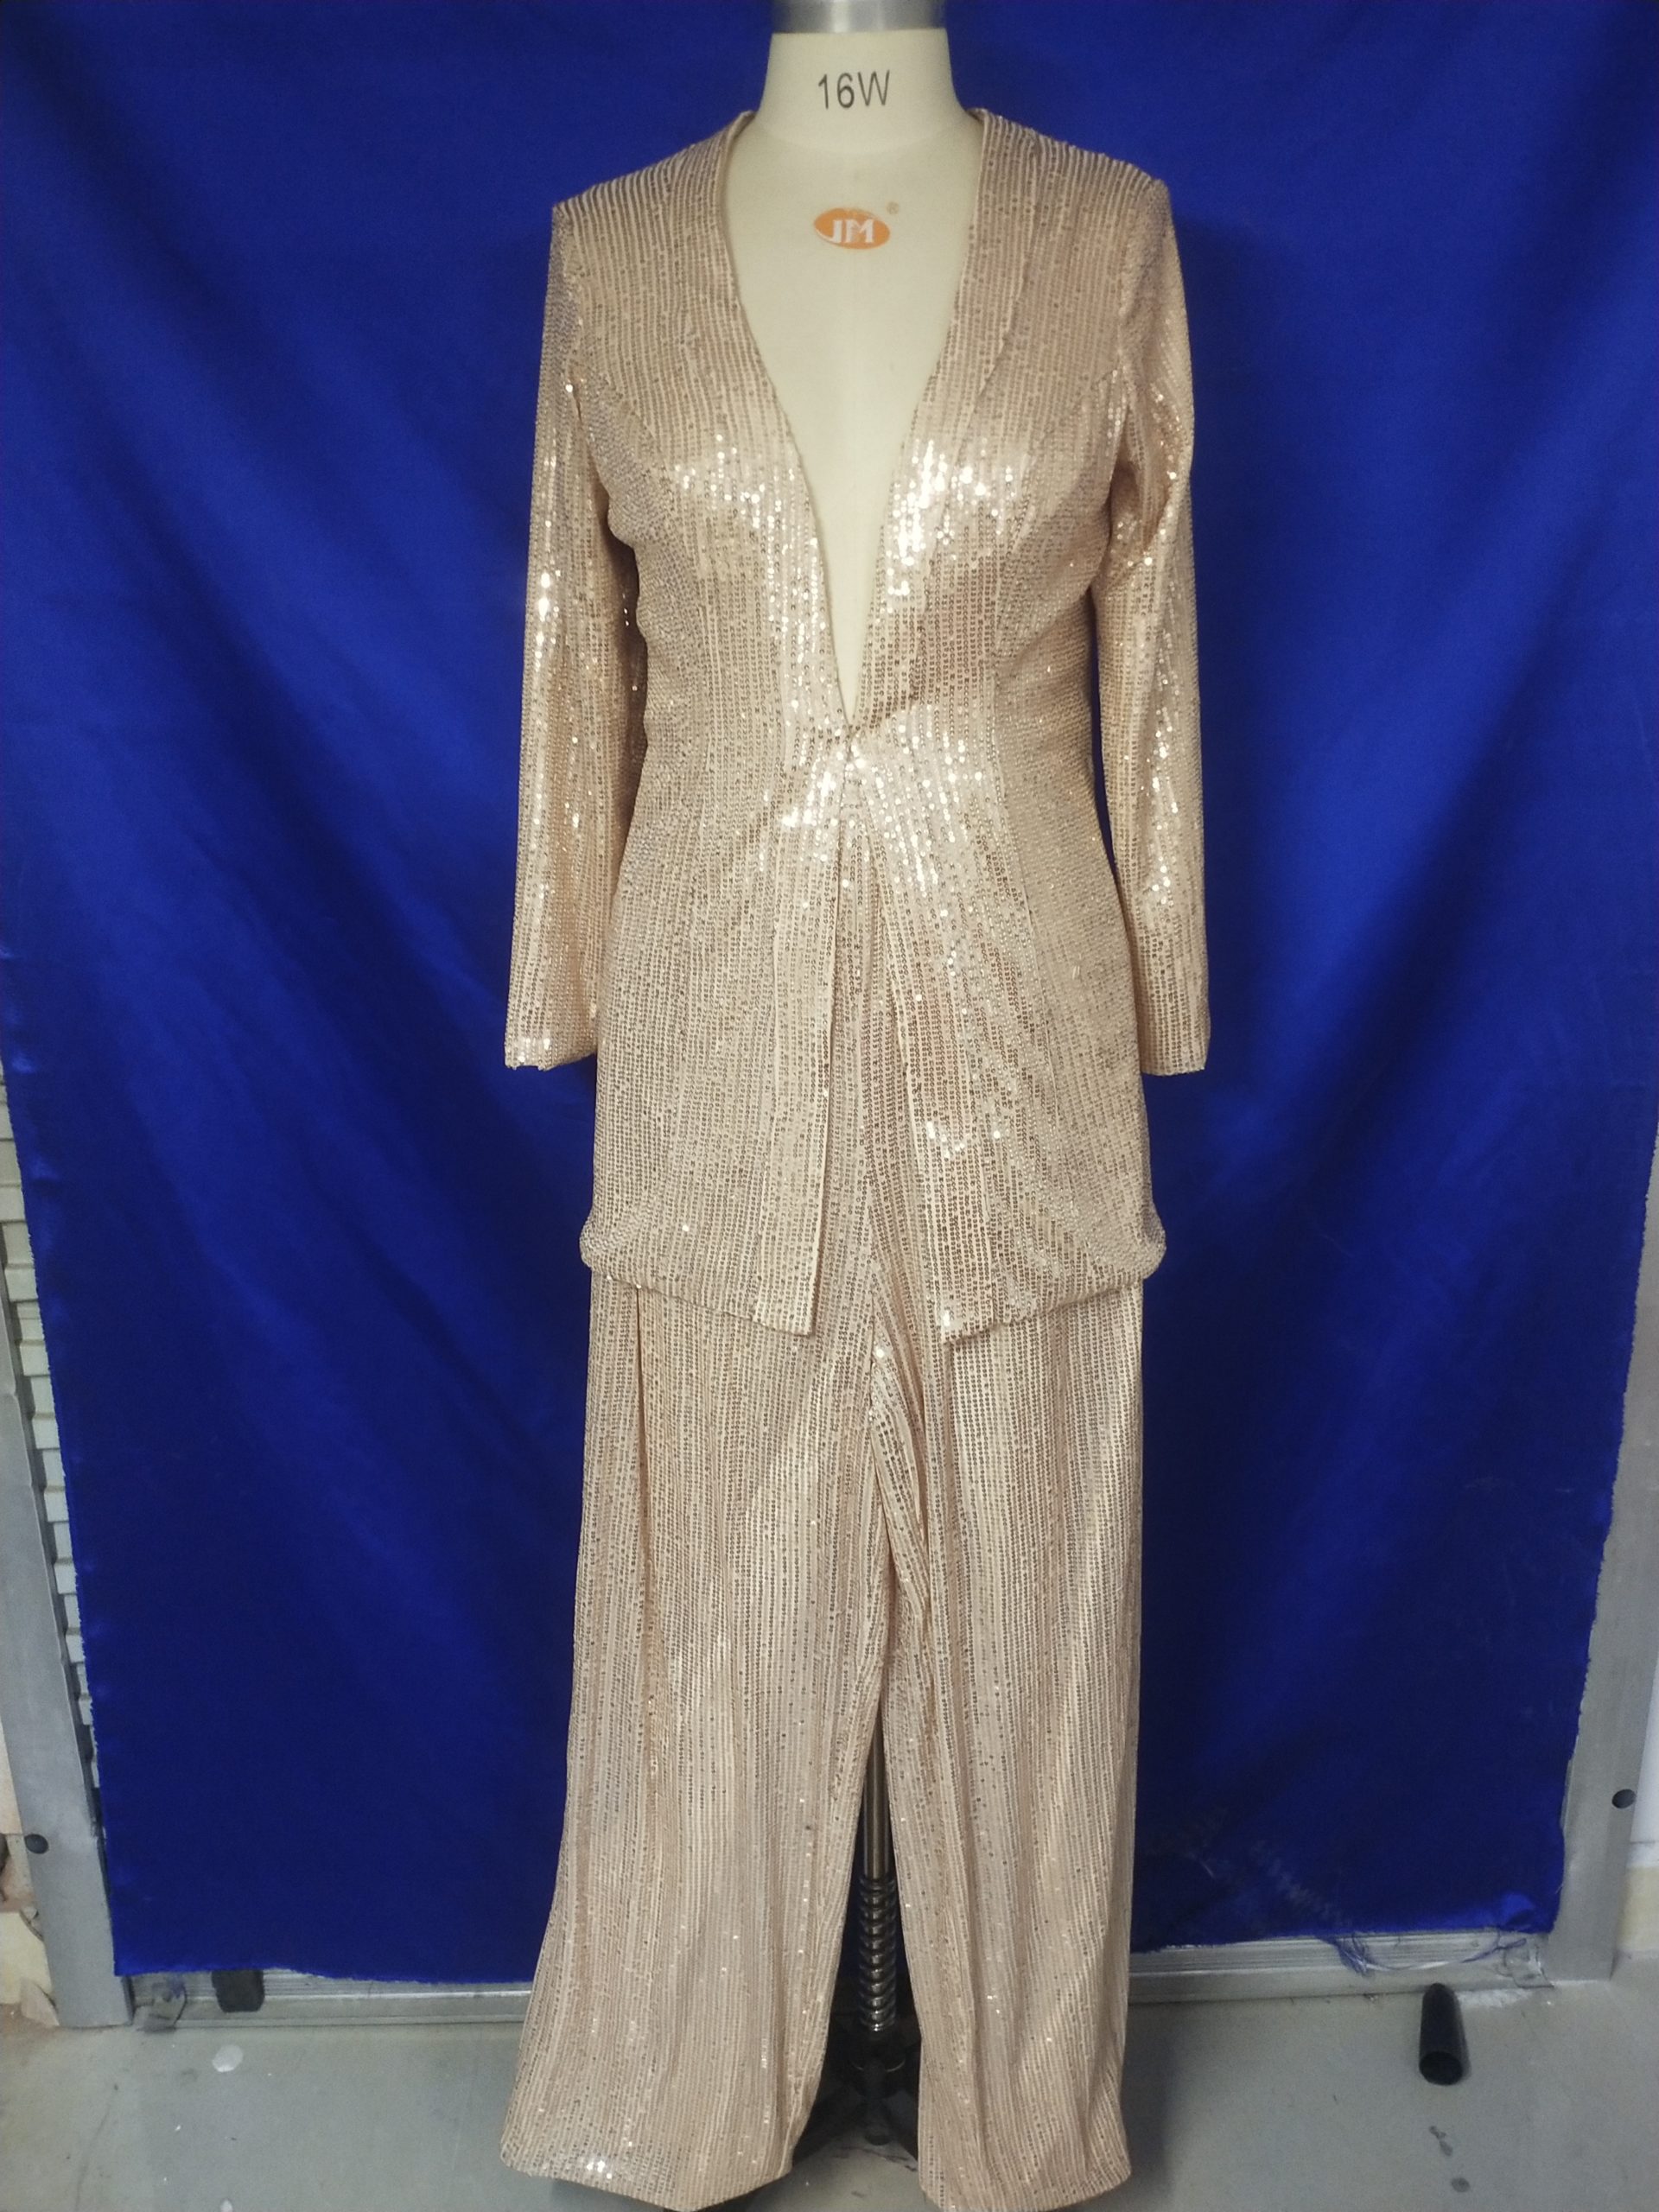 Long sleeve two piece sequin pant suit by Darius Cordell